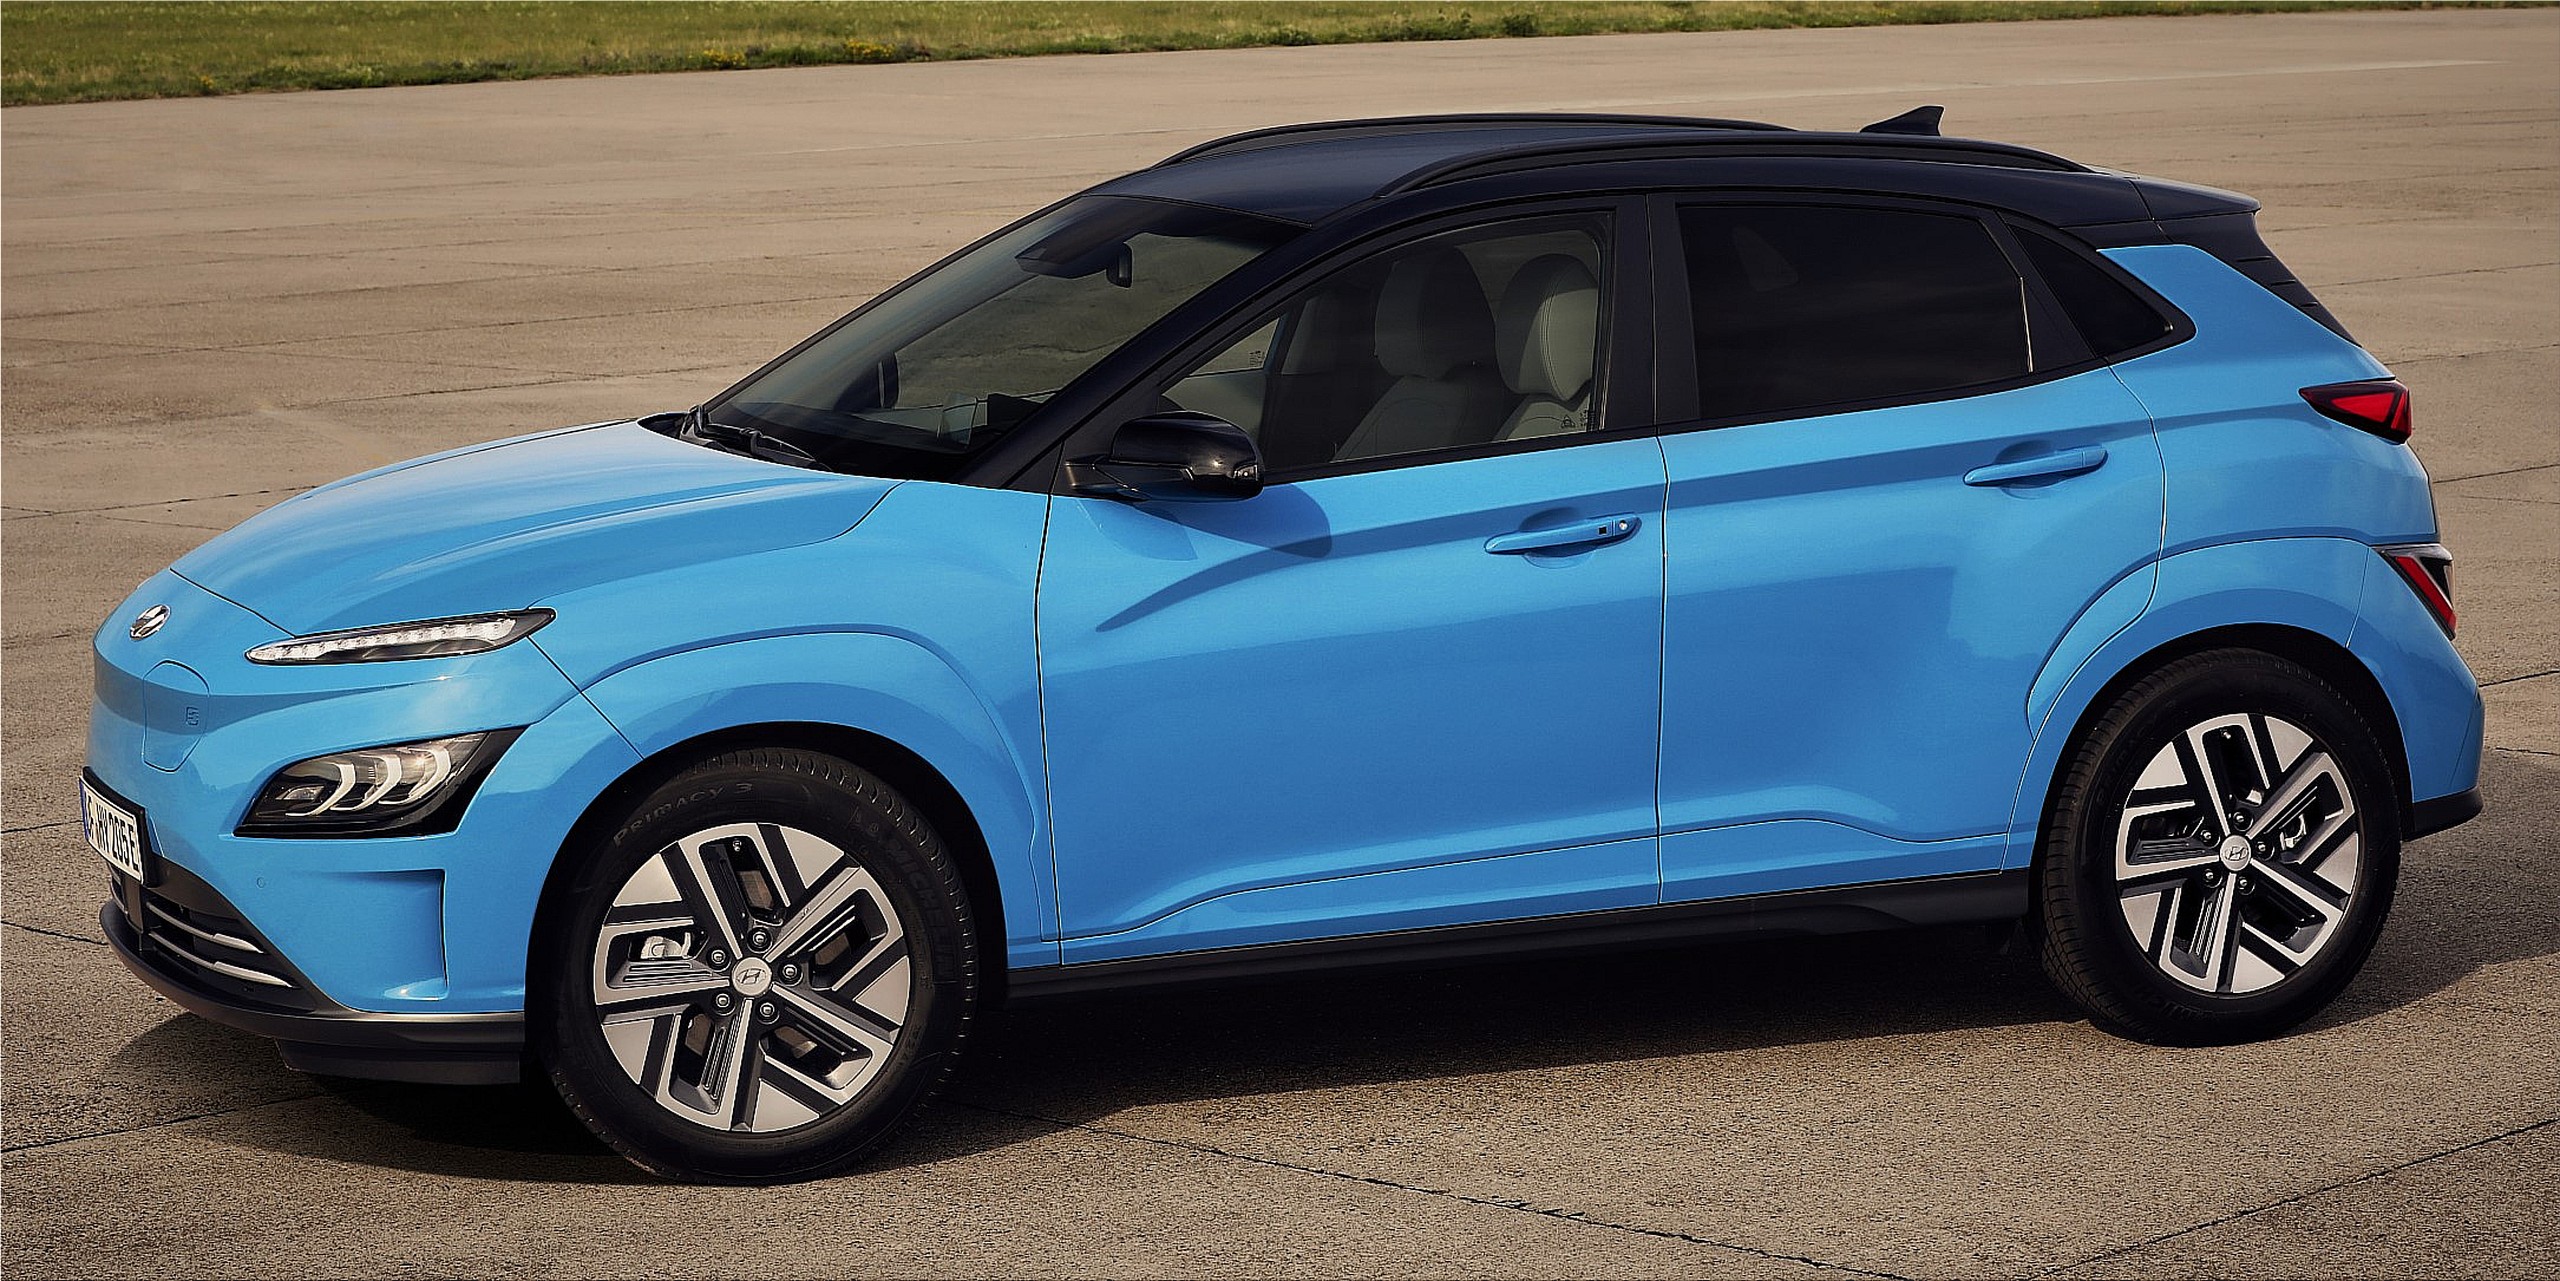 The price list for the 2021 Hyundai KONA Electric car Electric Hunter